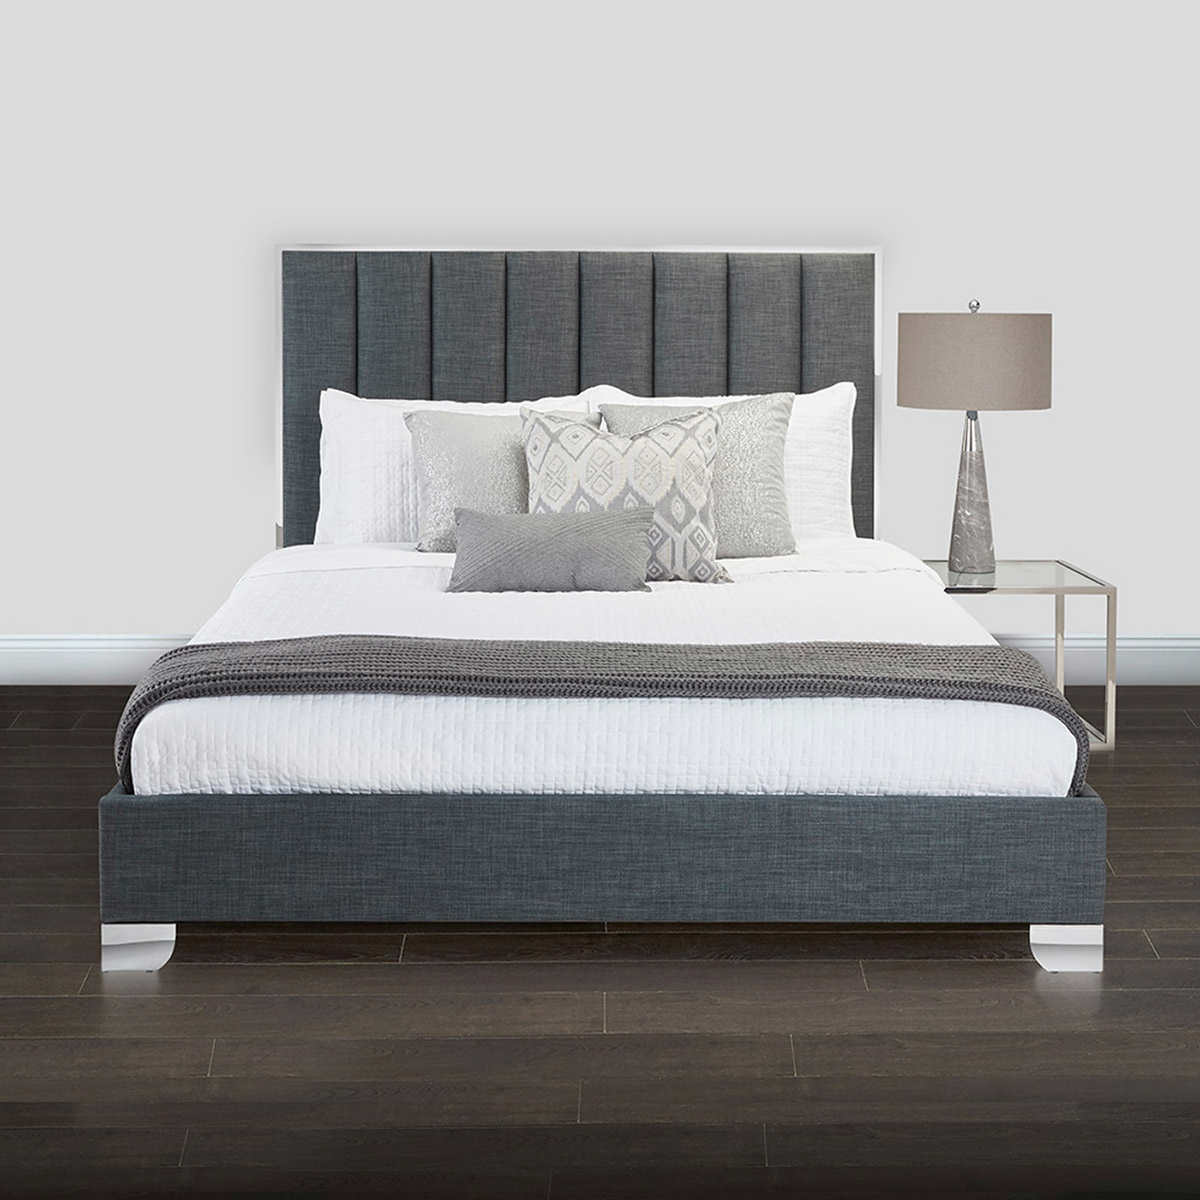 Loren Upholstered Queen Bed Costco, Plinth Bed Frame Review